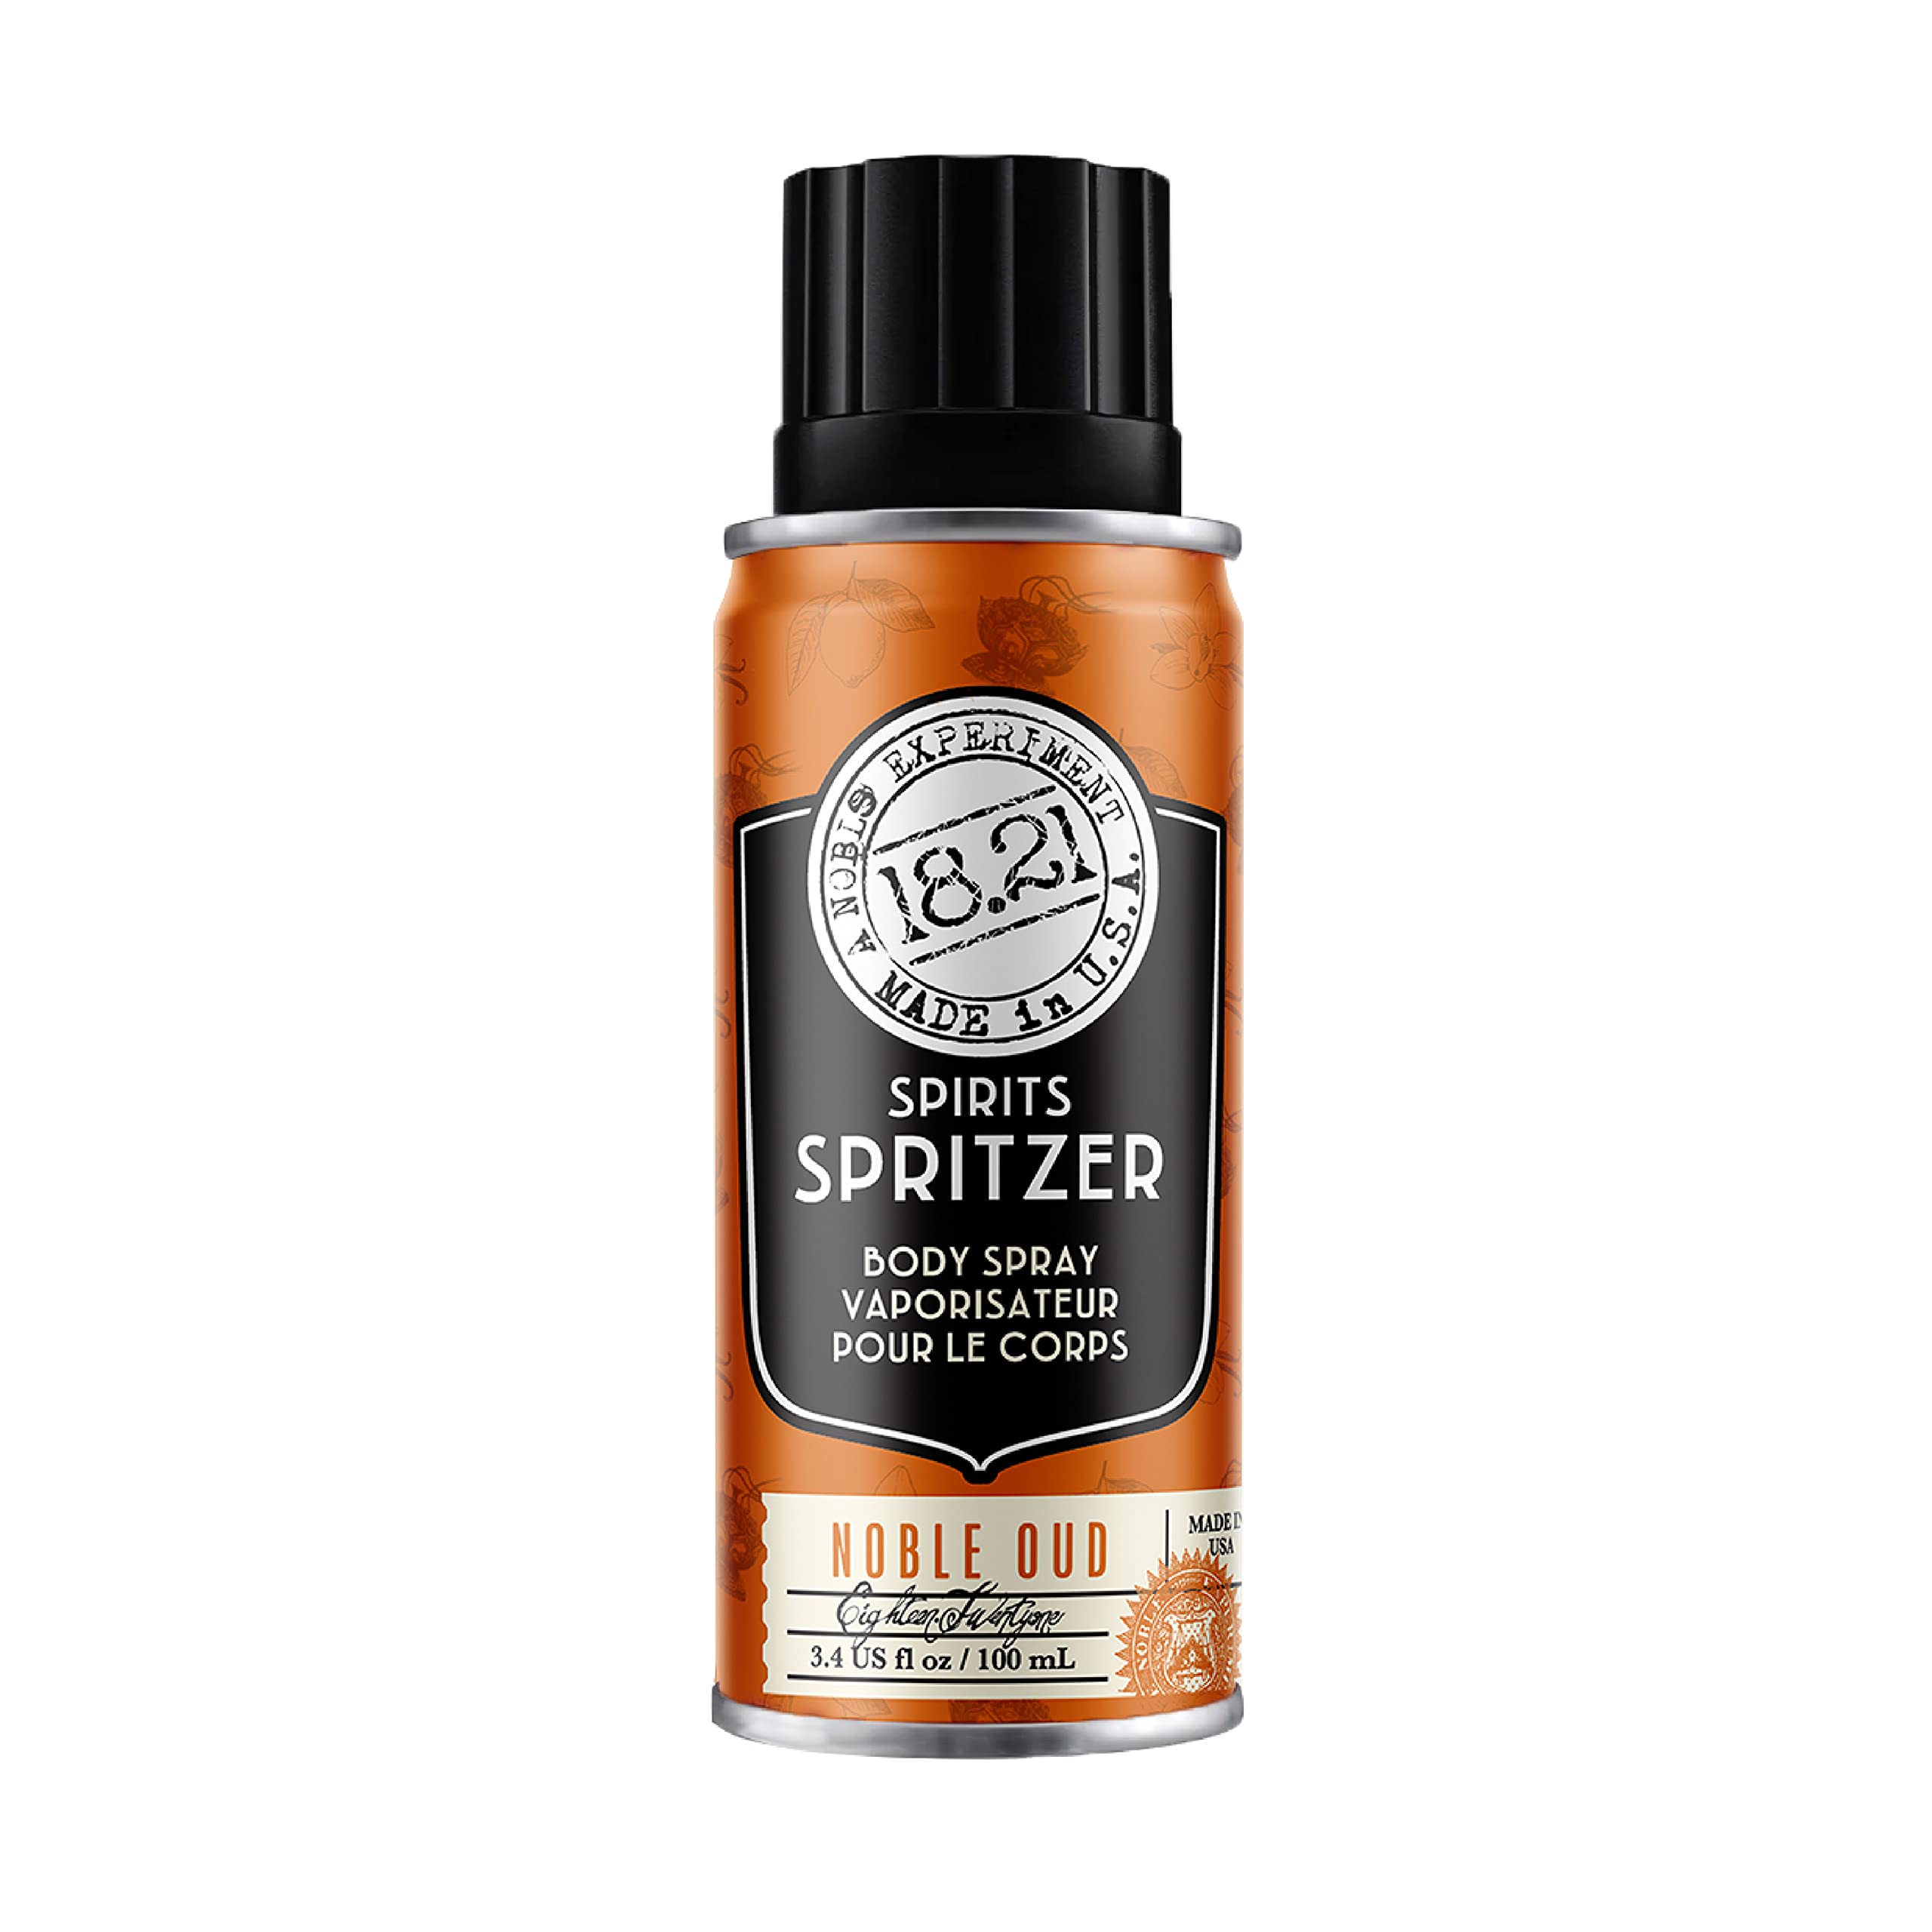 18.21 Man Made Men’s Spirits Spritzer, 3.4 oz. - Long-Lasting All Over Body Spray with Masculine Aromatics - Gifts for Him